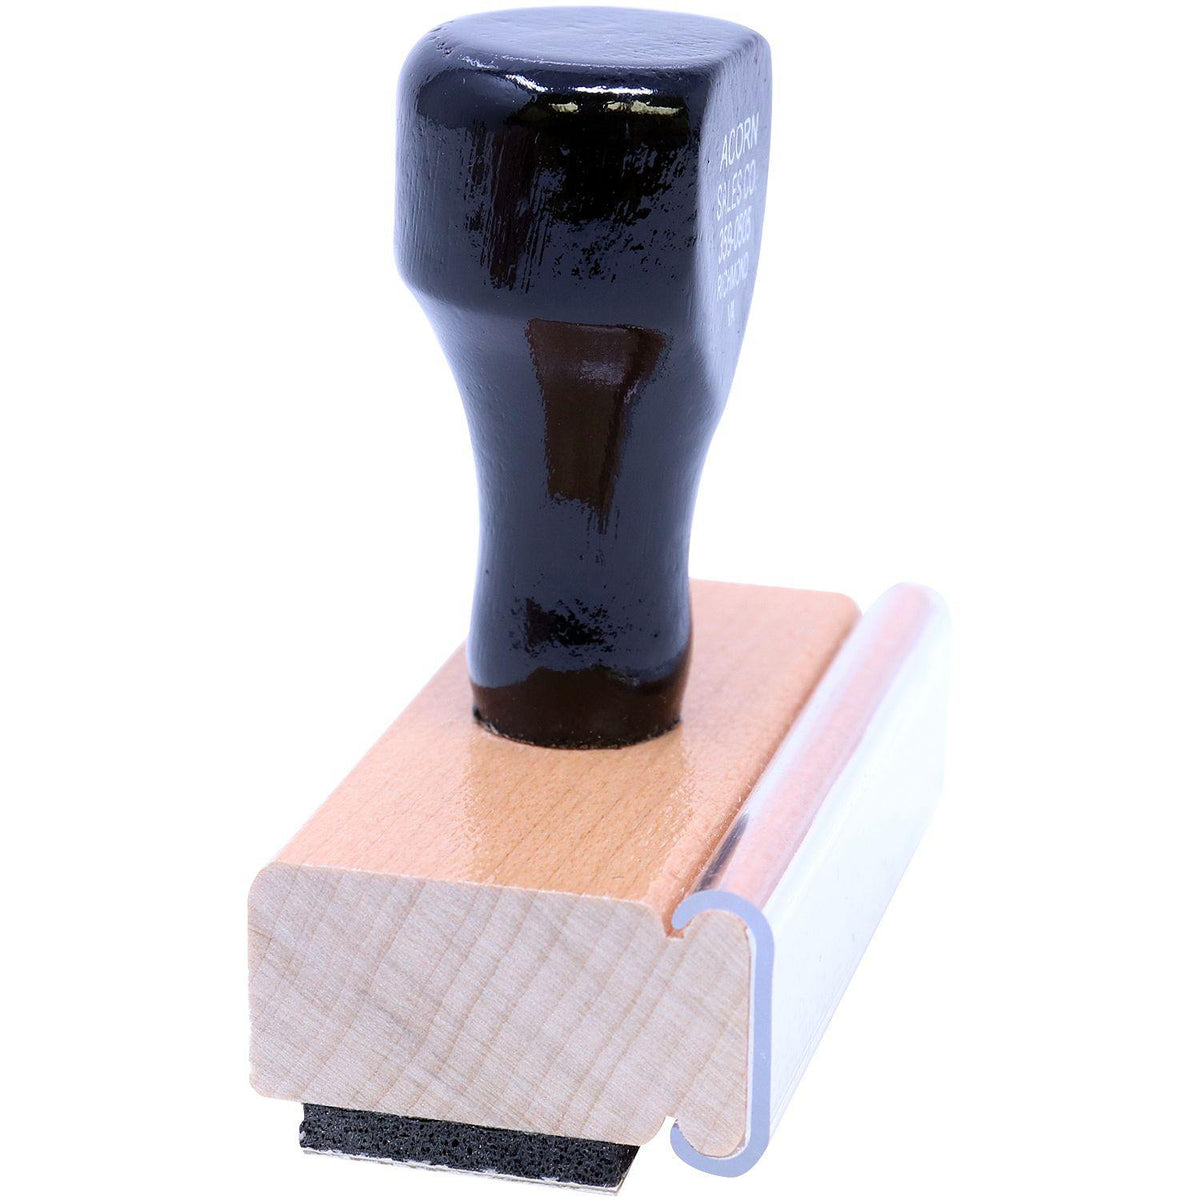 Side View of Large Attorney-Client Privilege Rubber Stamp at an Angle